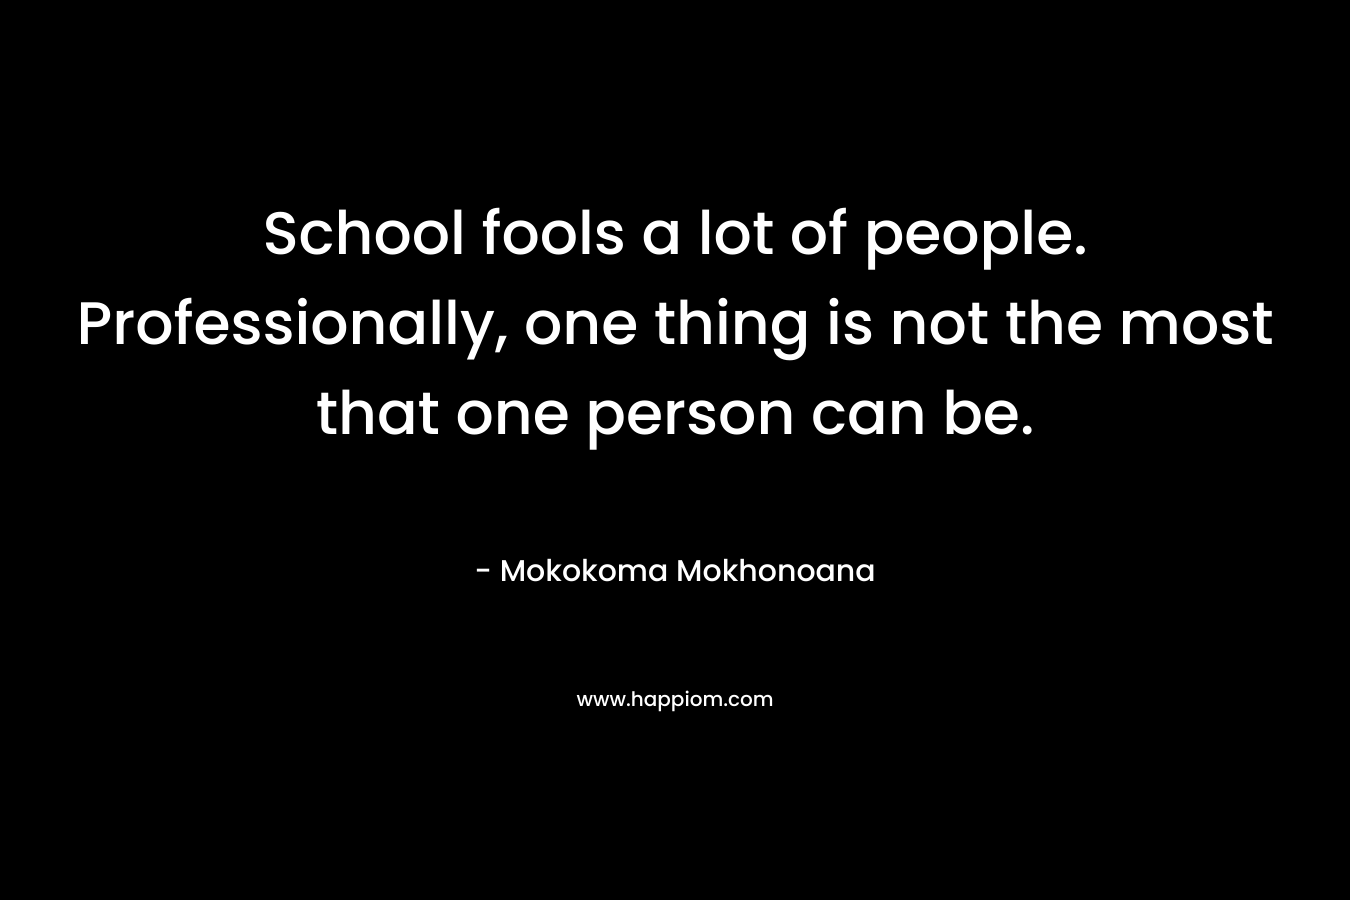 School fools a lot of people. Professionally, one thing is not the most that one person can be.